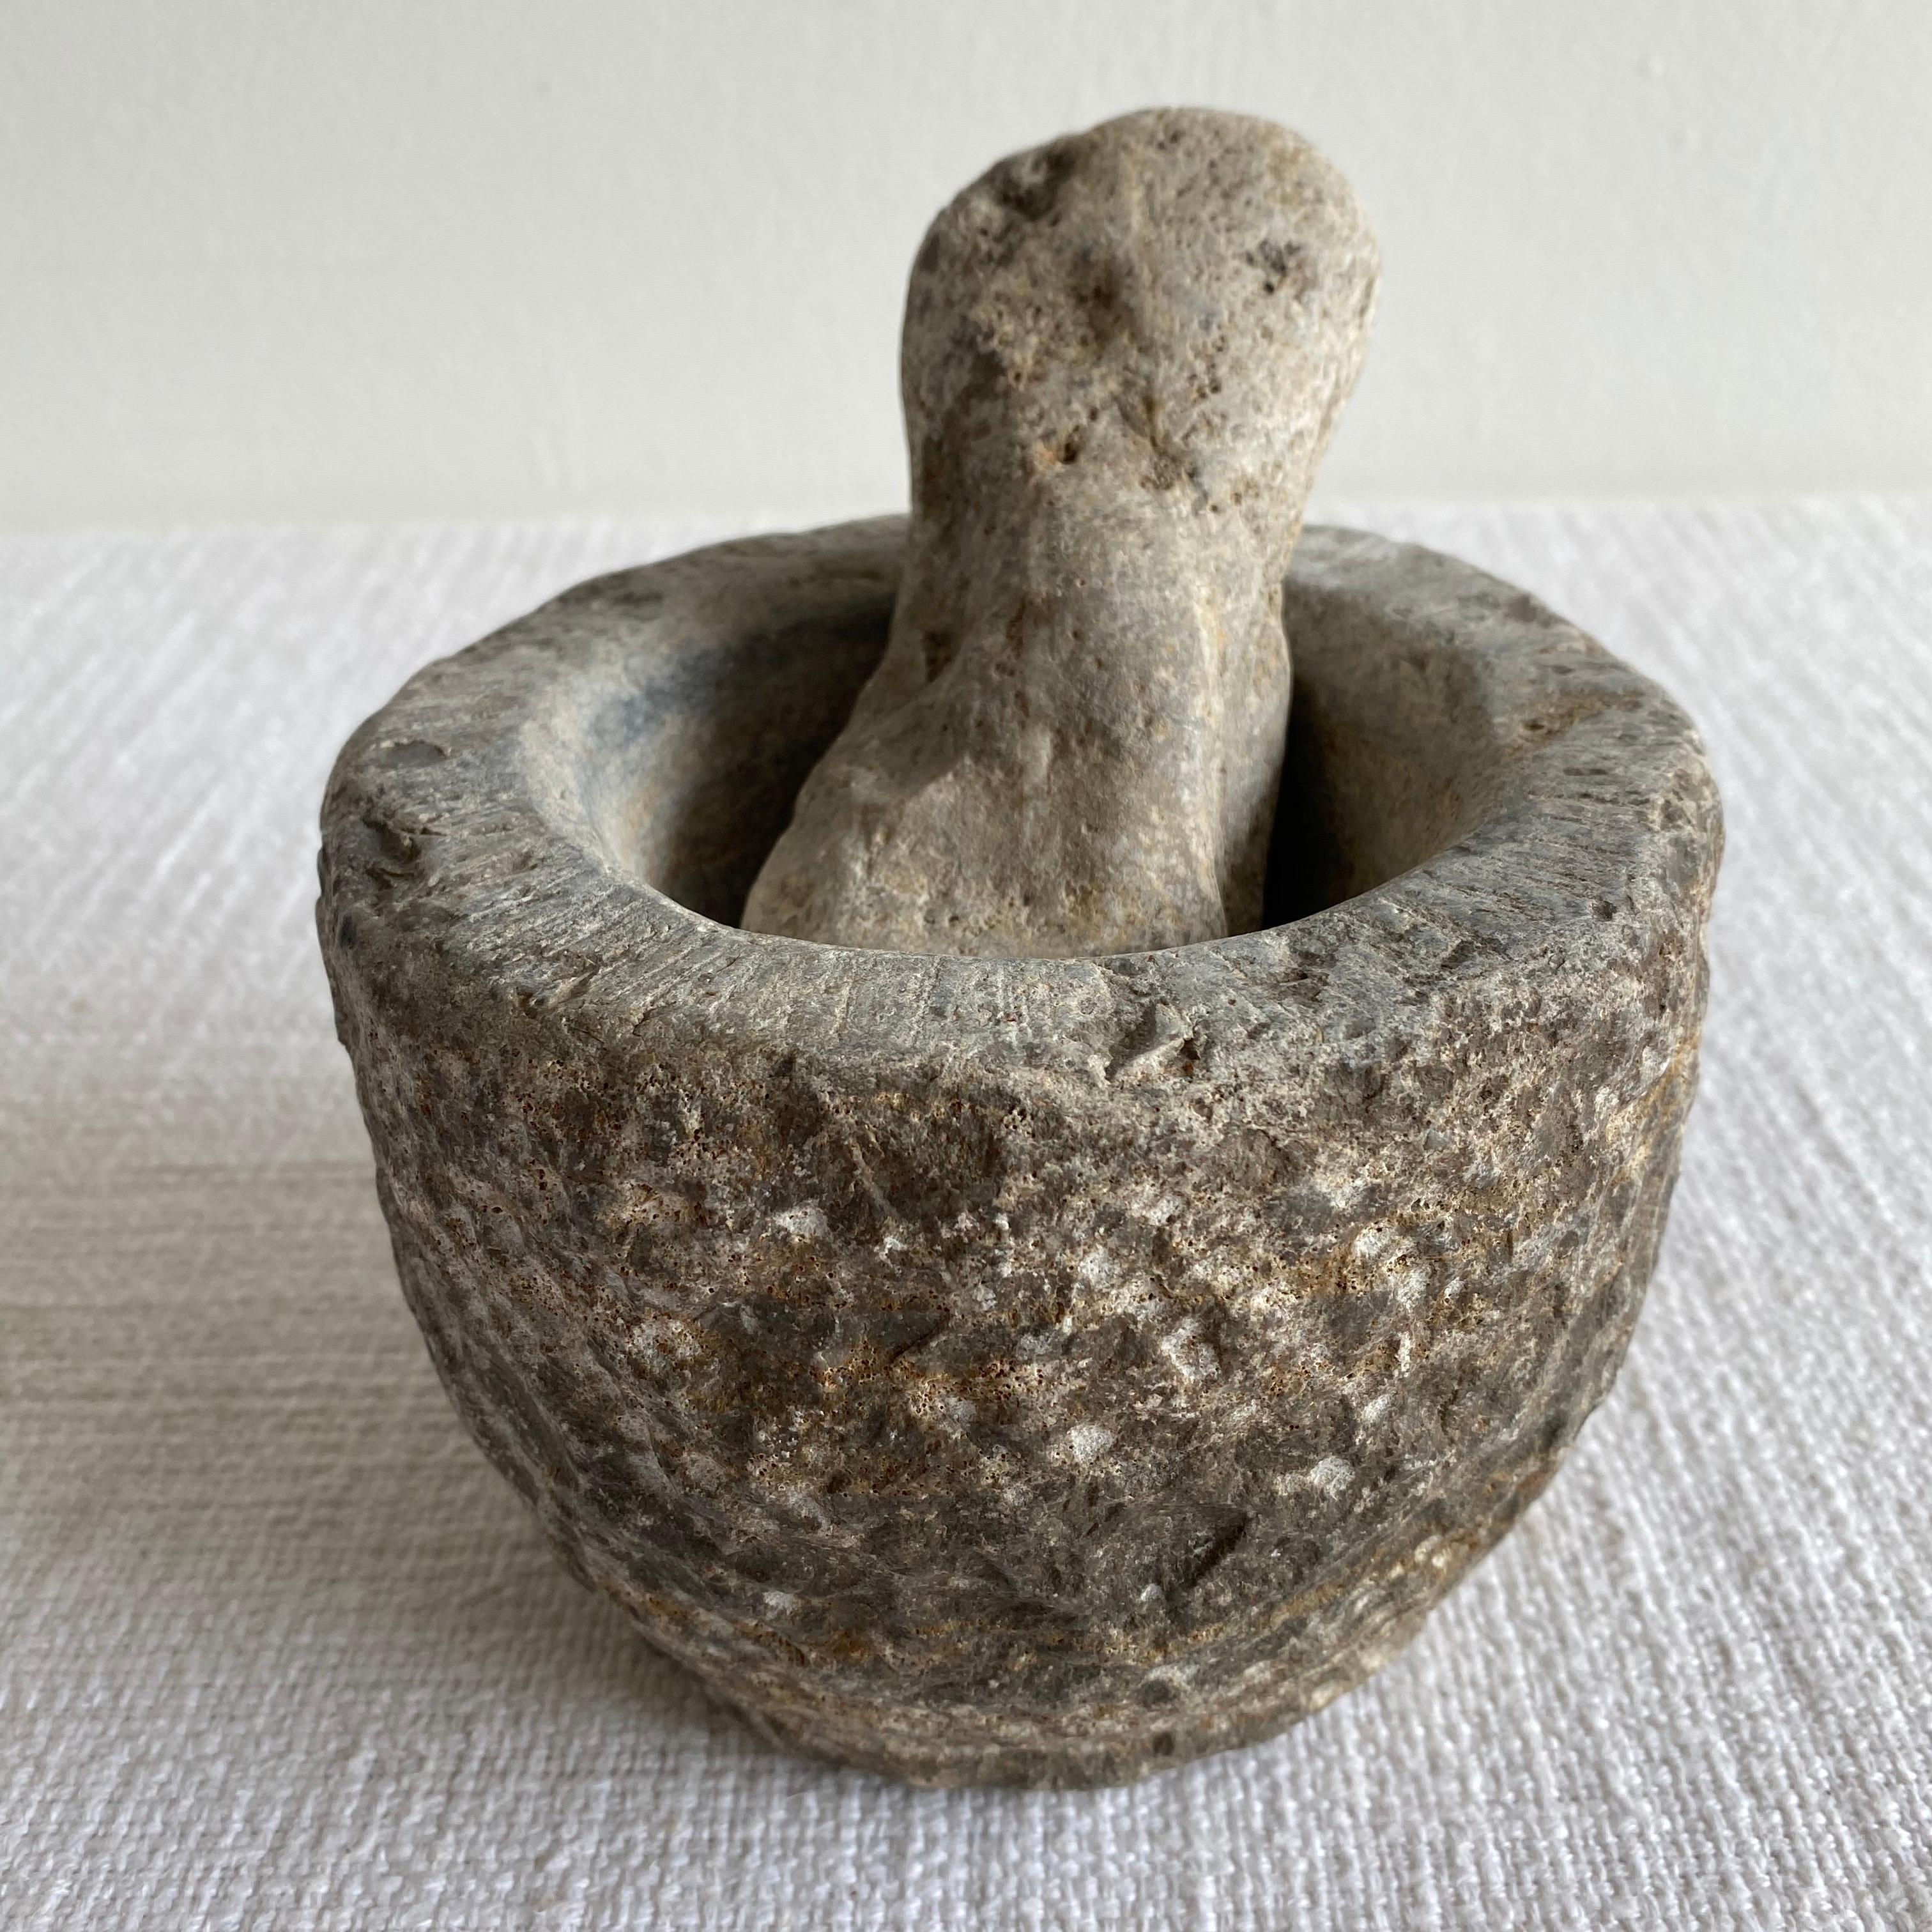 Antique stone mortar and pestle set, solid heavy stone, use as decoration, or for everyday use.
Size: 6” D x 4.25”
Weight: 10lbs.